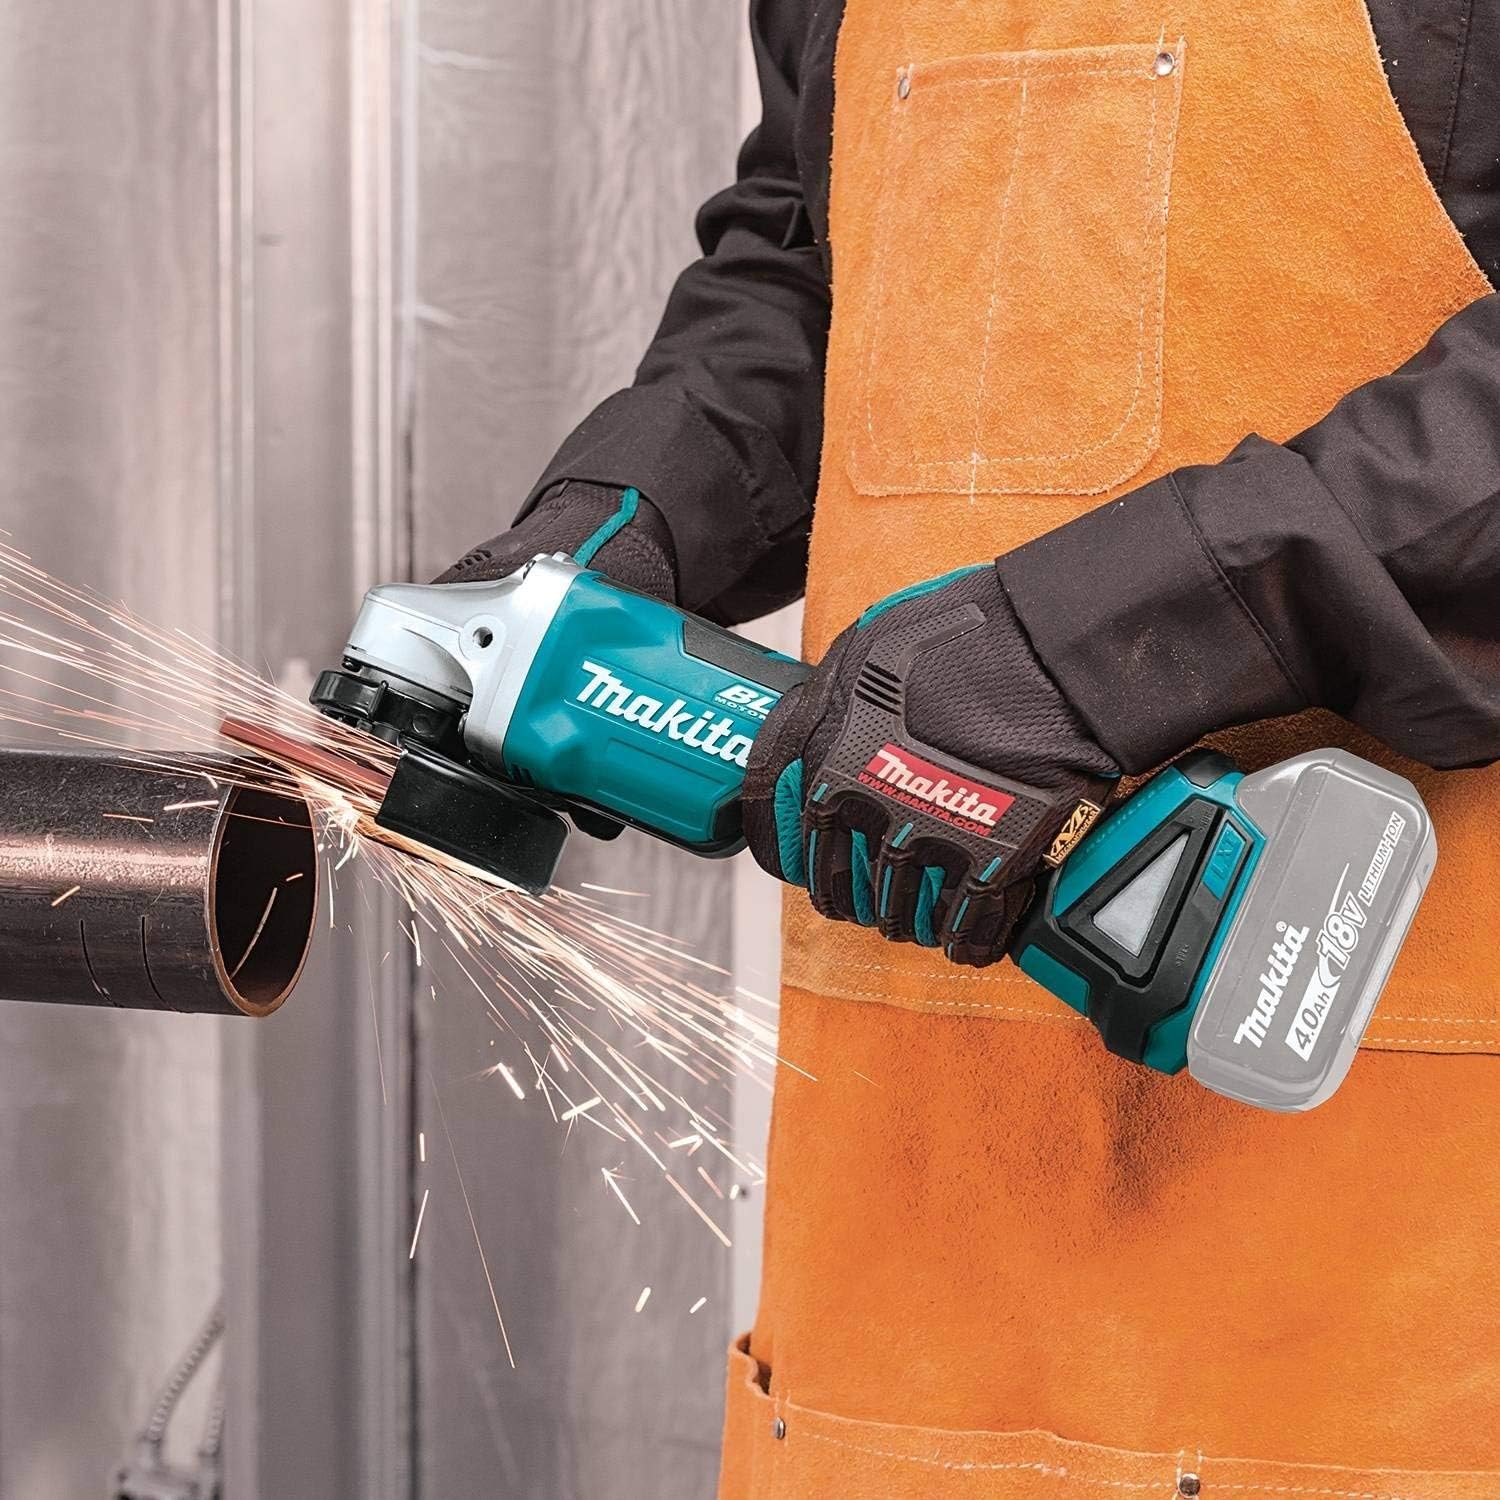 Makita XAG11Z 18V LXT Lithium-Ion Brushless Cordless 4-1/2-Inch / 5-Inch Paddle Switch Cut-Off/Angle Grinder, with Electric Brake  BL1840B 18V LXT Lithium-Ion 4.0Ah Battery